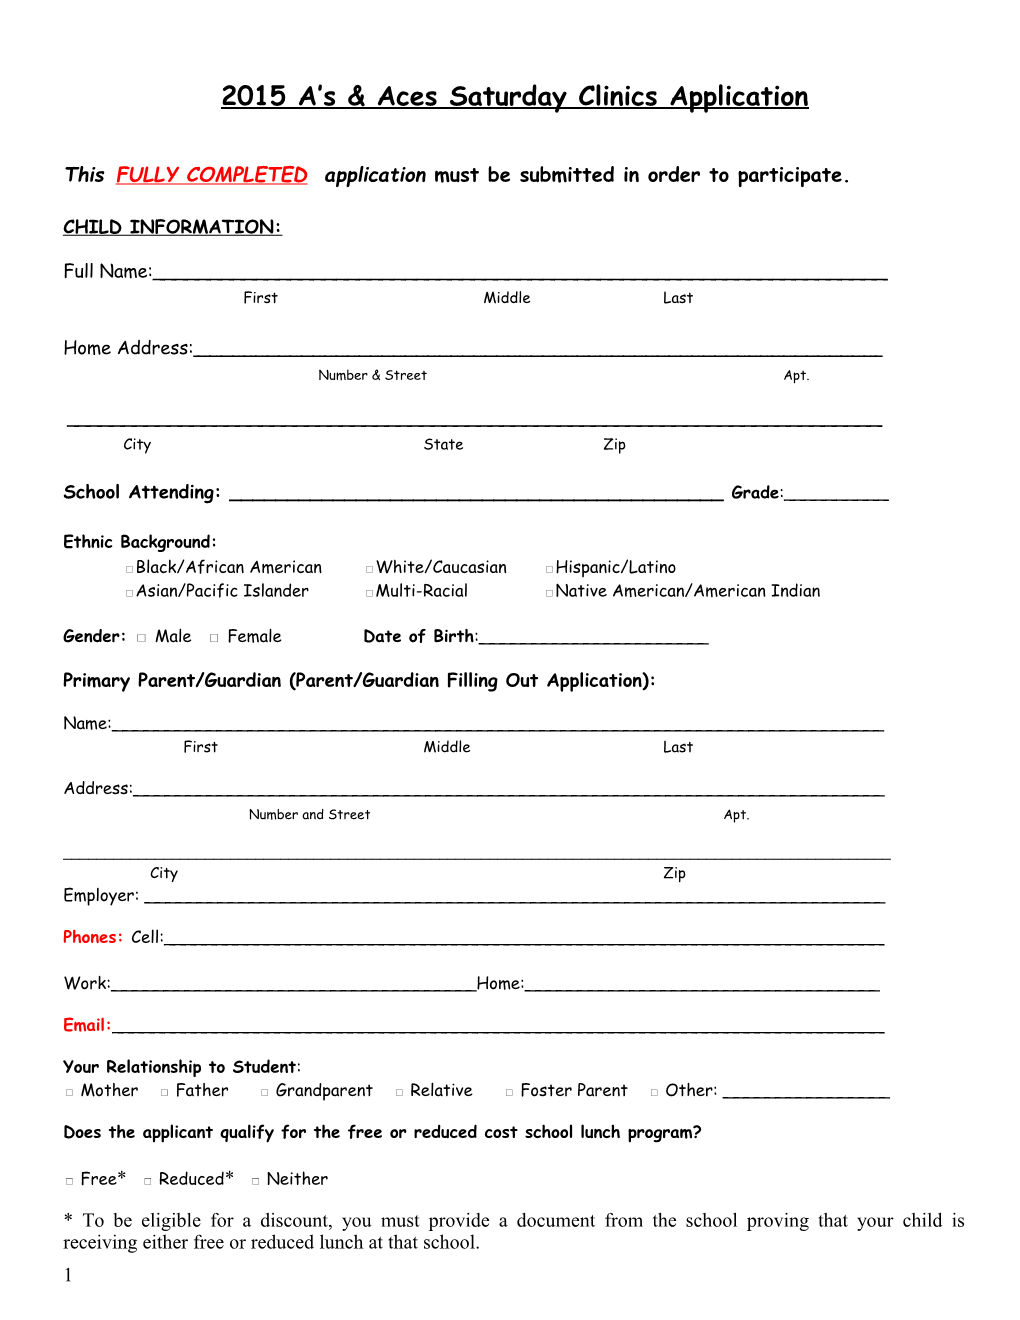 This FULLY COMPLETED Applicationmust Be Submitted in Order to Participate